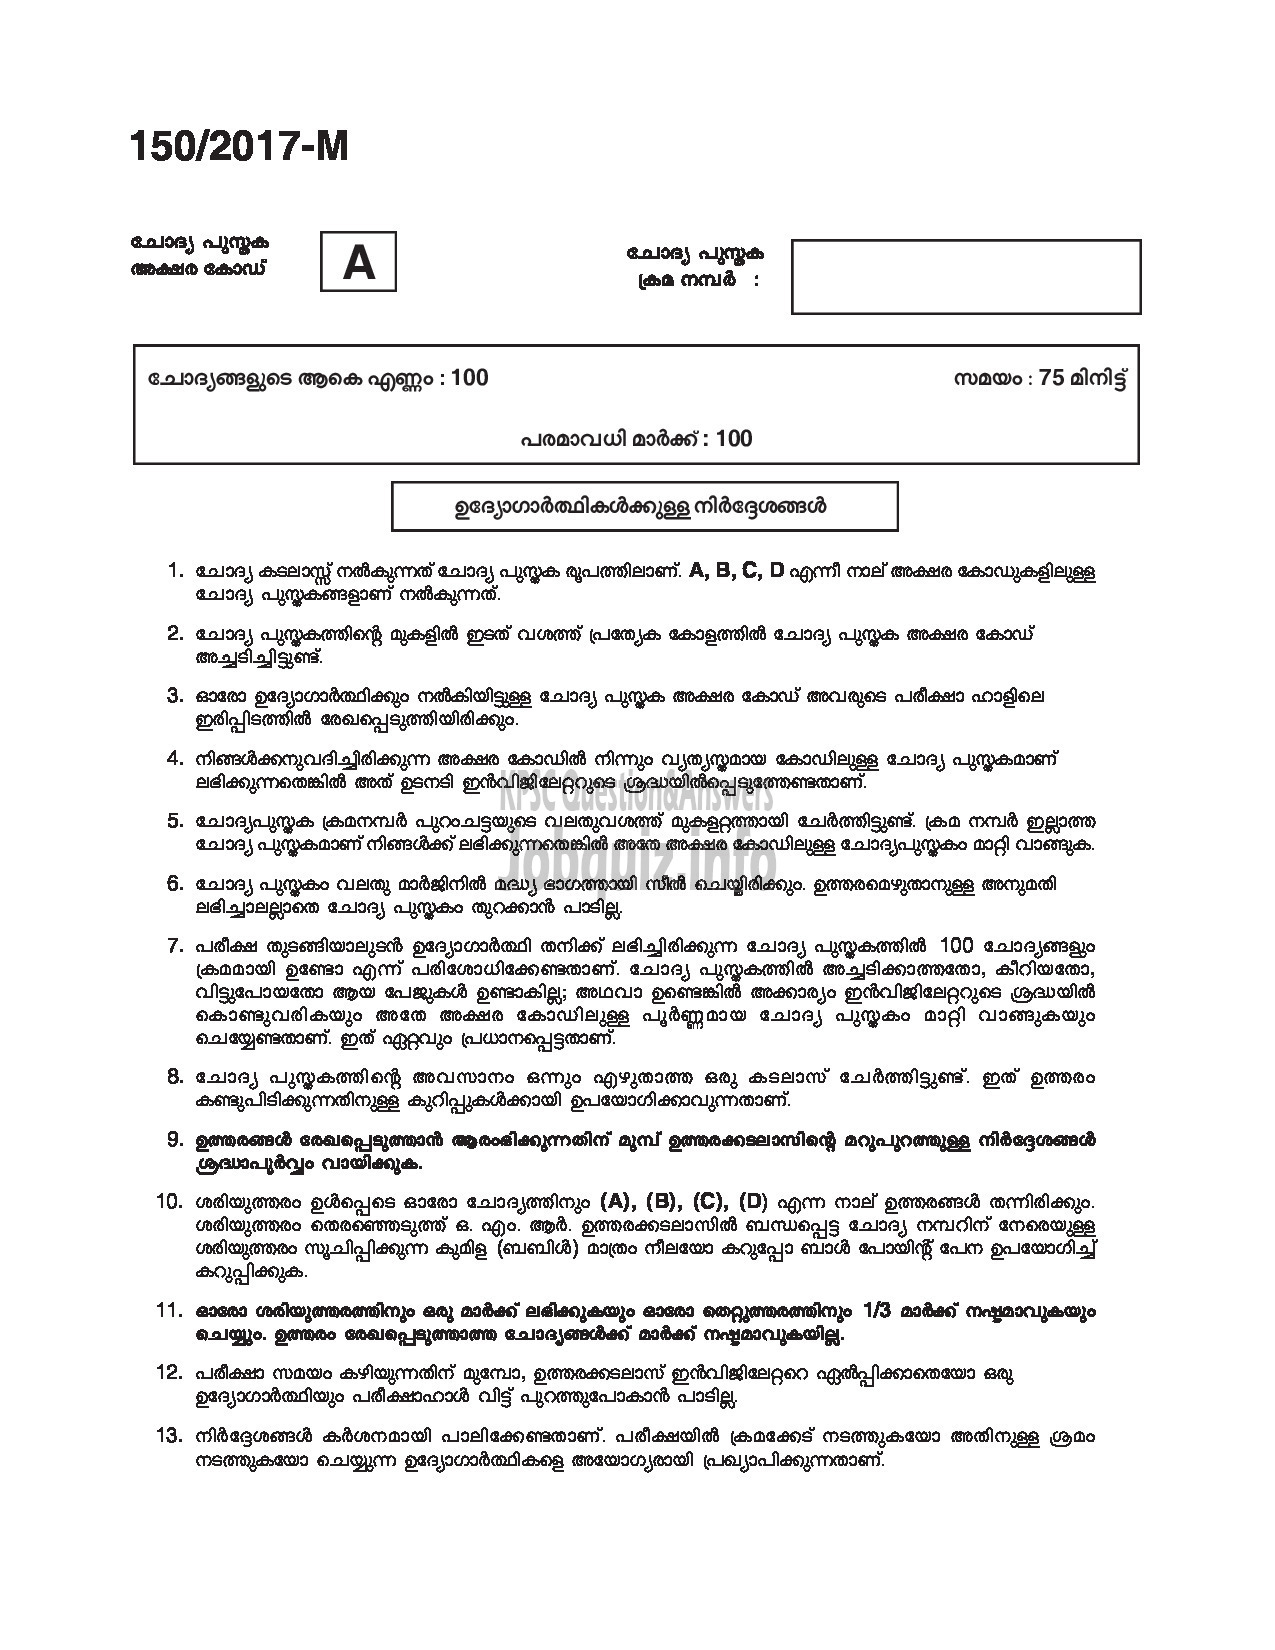 Kerala PSC Question Paper - BOAT DECKMAN EXCISE MALAYALAM-1